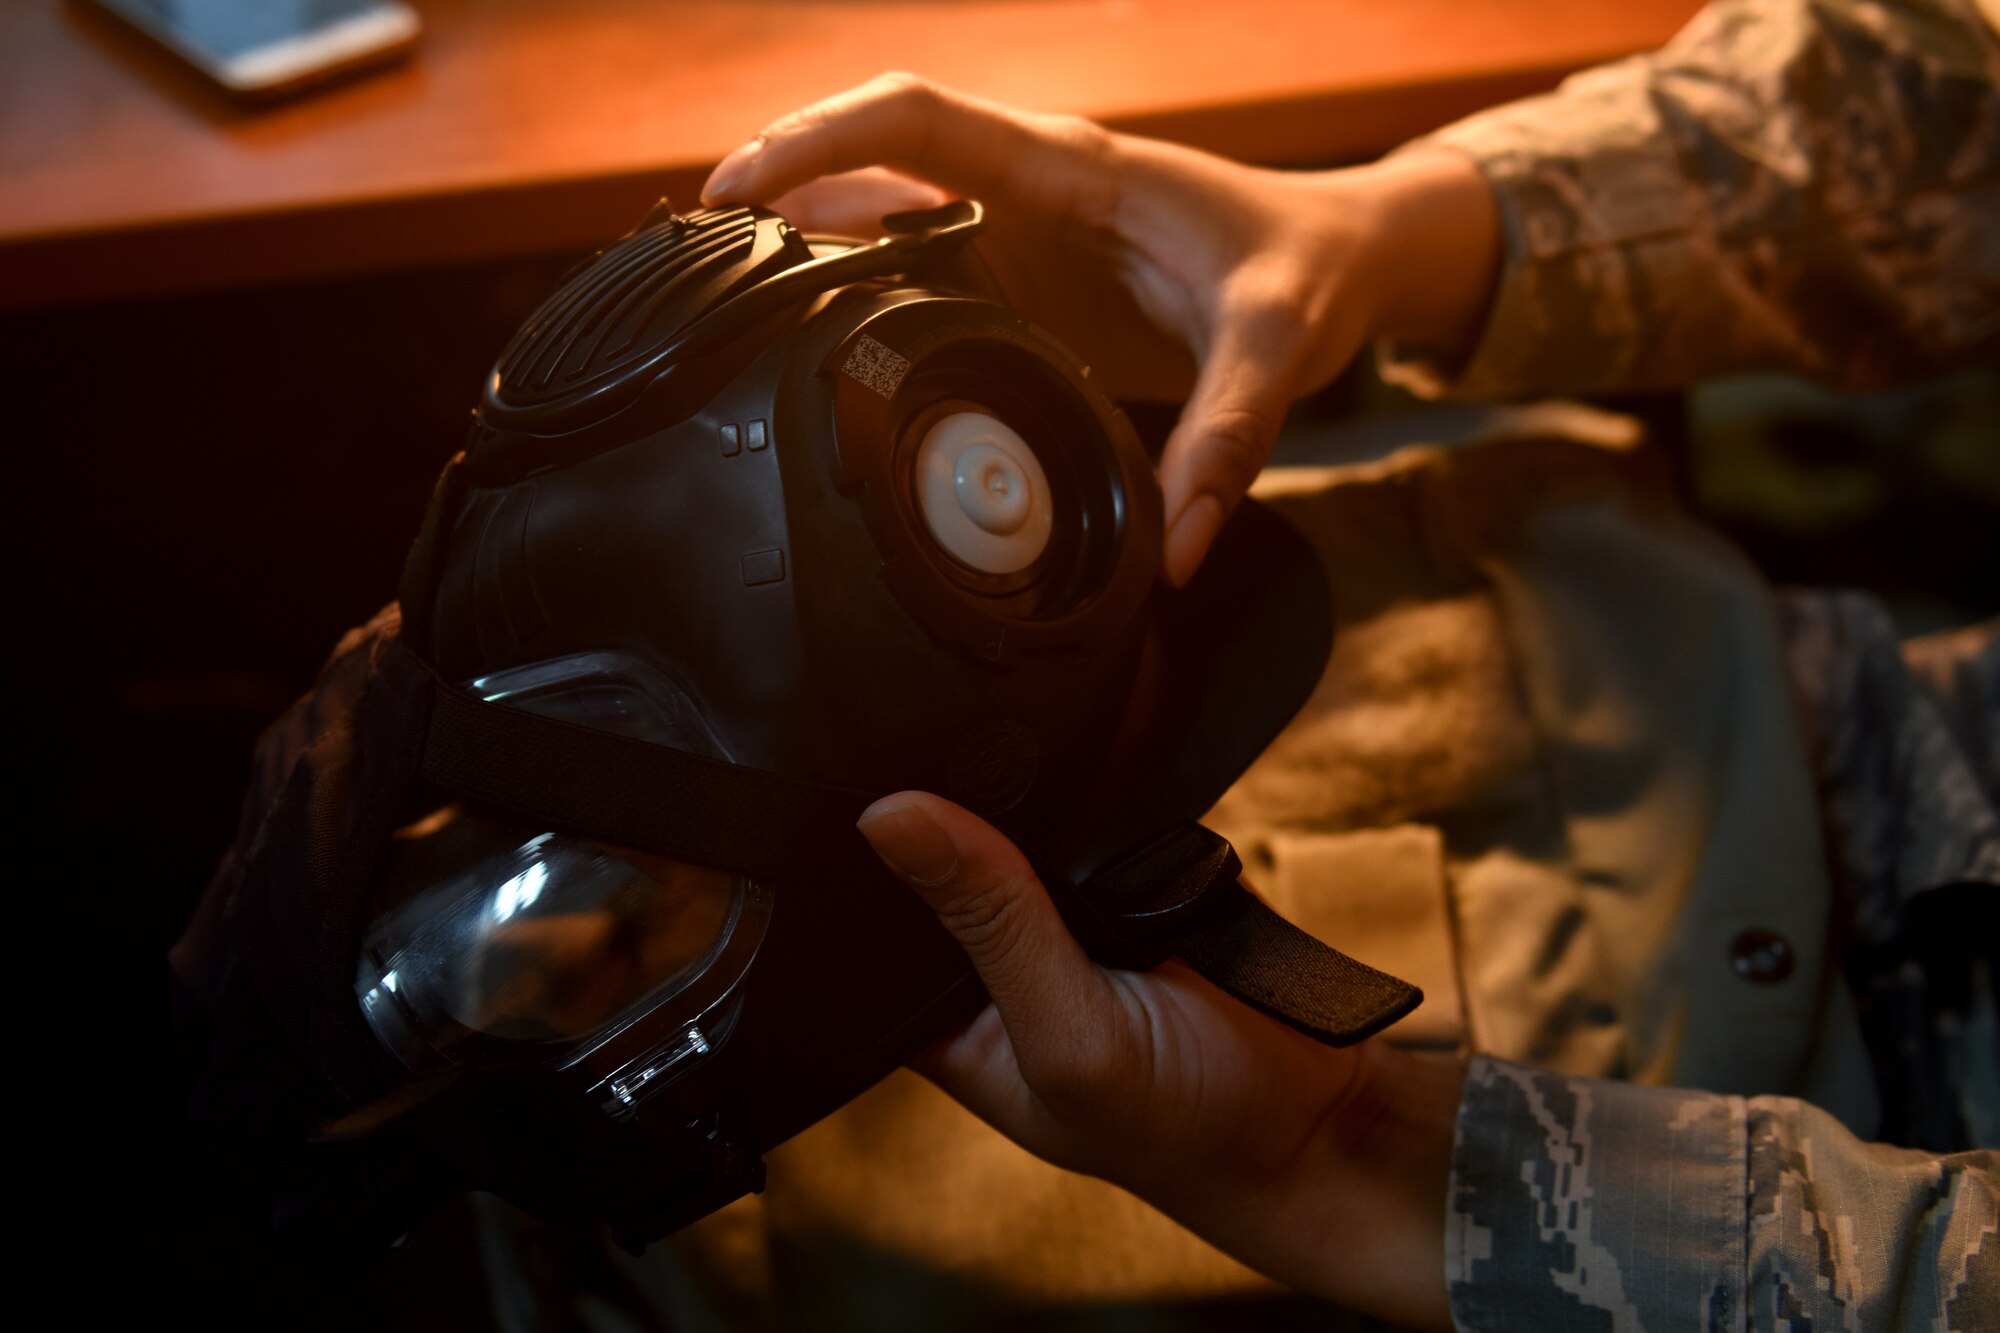 An Airman assigned to the 48th Fighter Wing inspects a gas mask at Royal Air Force Lakenheath, England, Oct. 5, 2020. The individual protective equipment section are essential to base wide exercises by ensuring Liberty Wing Airmen are prepared by providing training and deployment gear base wide. (U.S. Air Force photo by Rhonda Smith)